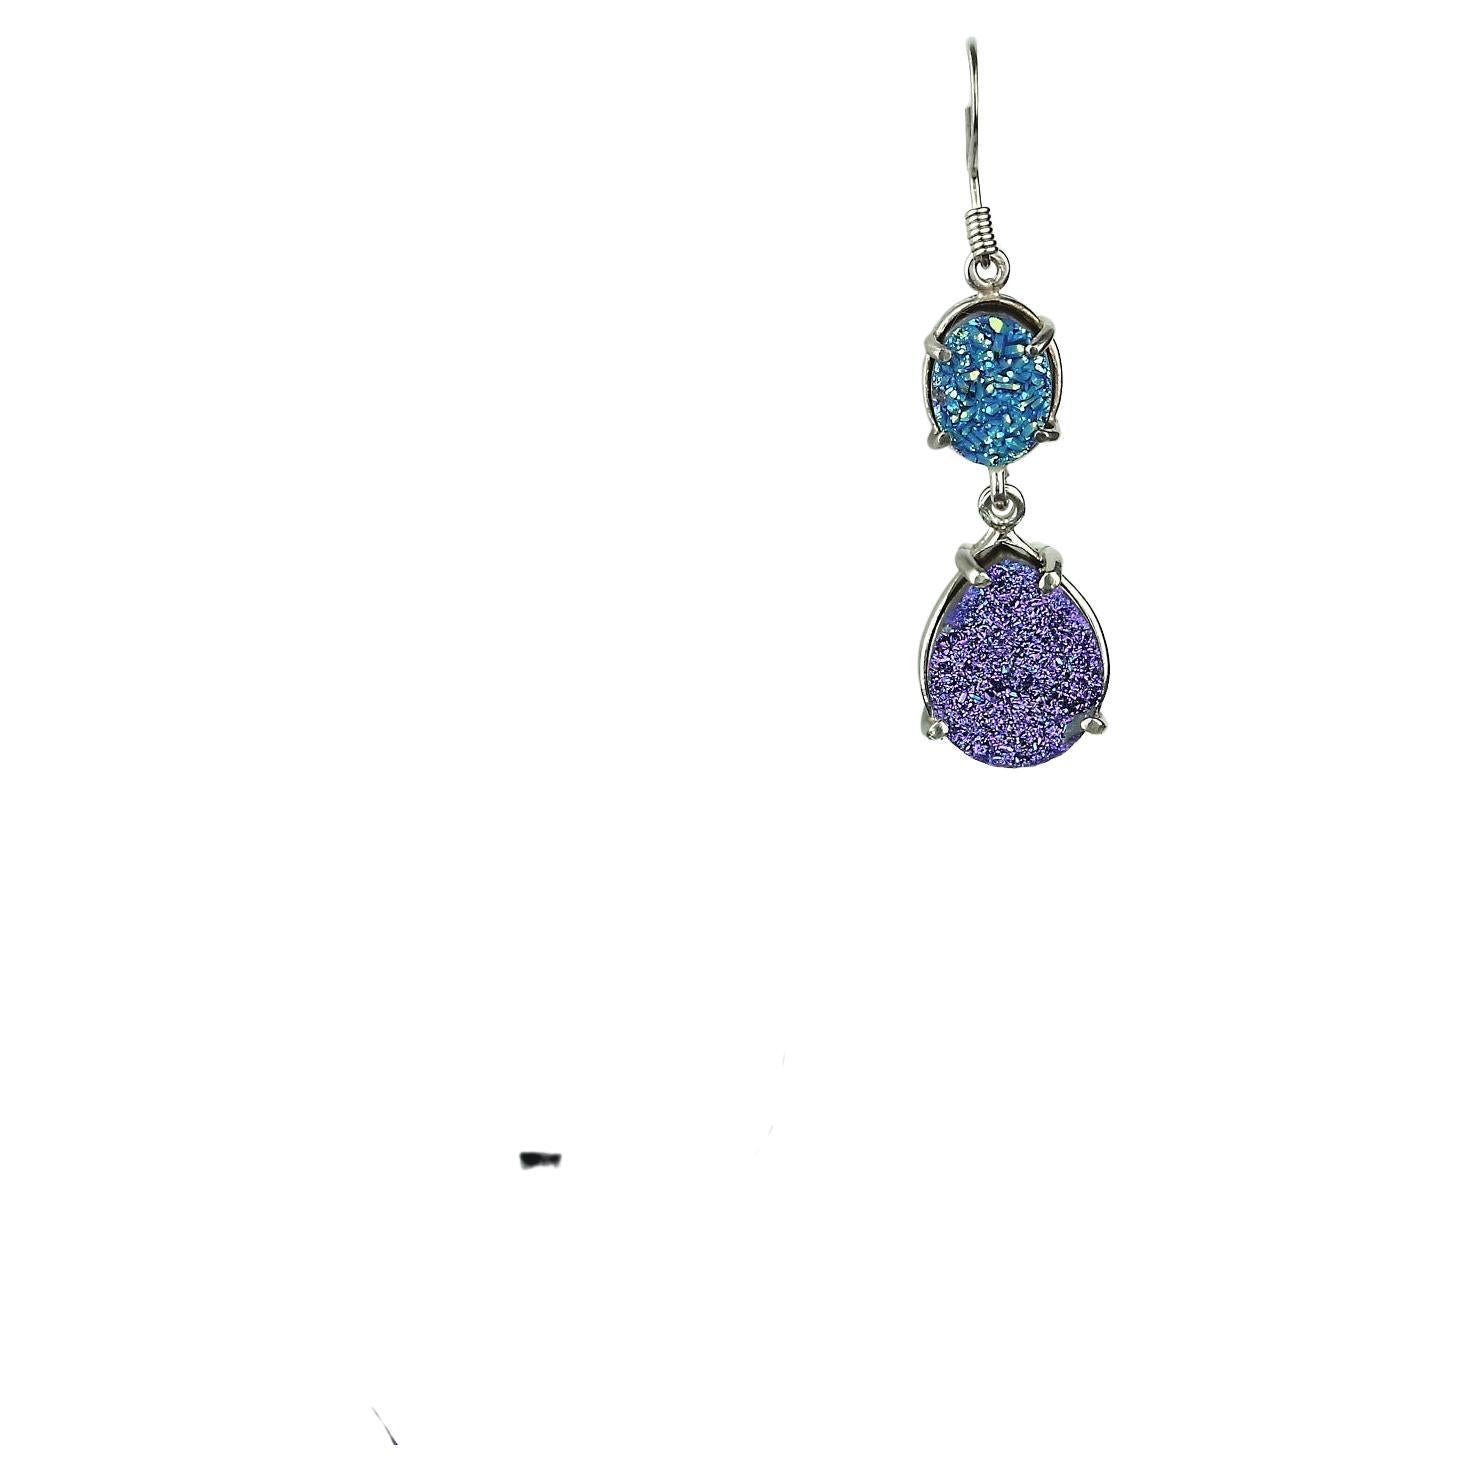 Sparkly Teal & Purple Druzy Dangle Earrings. Teal oval and Purple Pear shaped Durzys set in Sterling Silver Dangle from Silver Plated Stainless Steel earwires. Hinges at the top and bottom of the Teal Ovals maximize the movement and sparkle of these